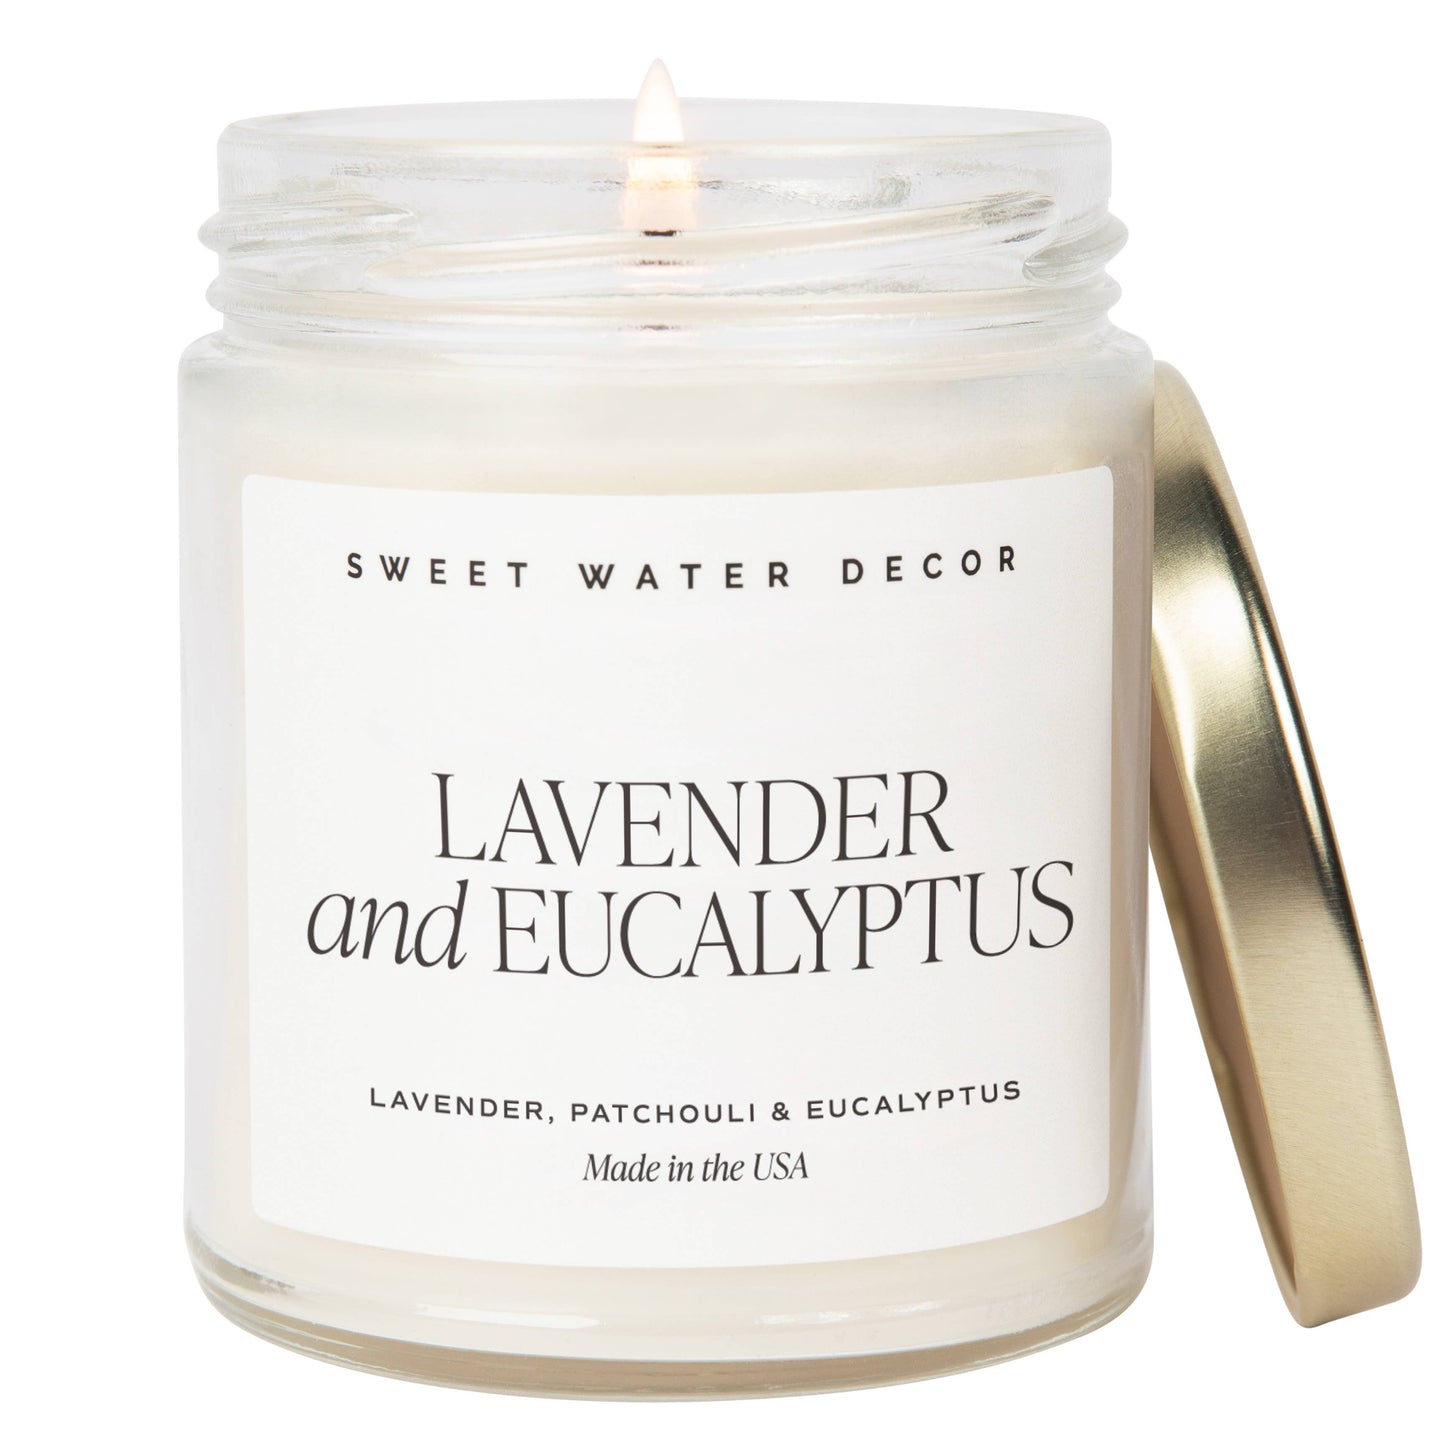 Sweet Water Decor - Lavender and Eucalyptus 9 oz Soy Candle - Home Decor & Gifts